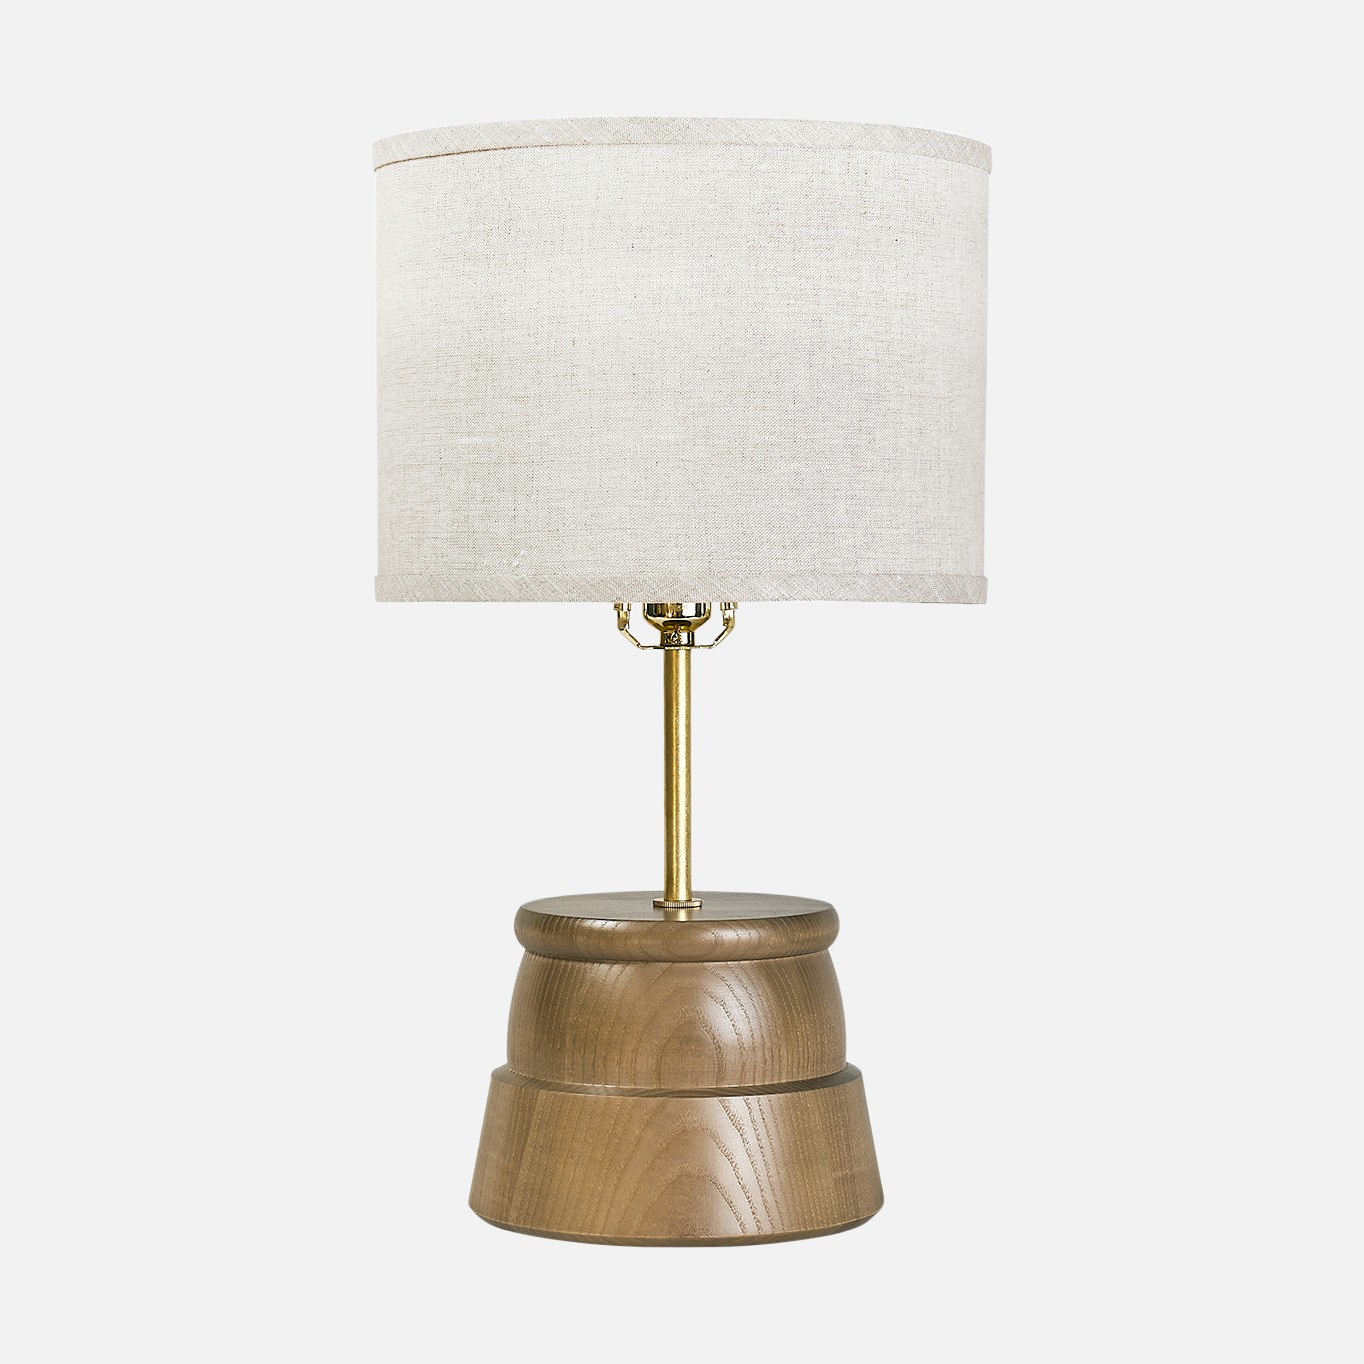 a wooden table lamp with a white shade